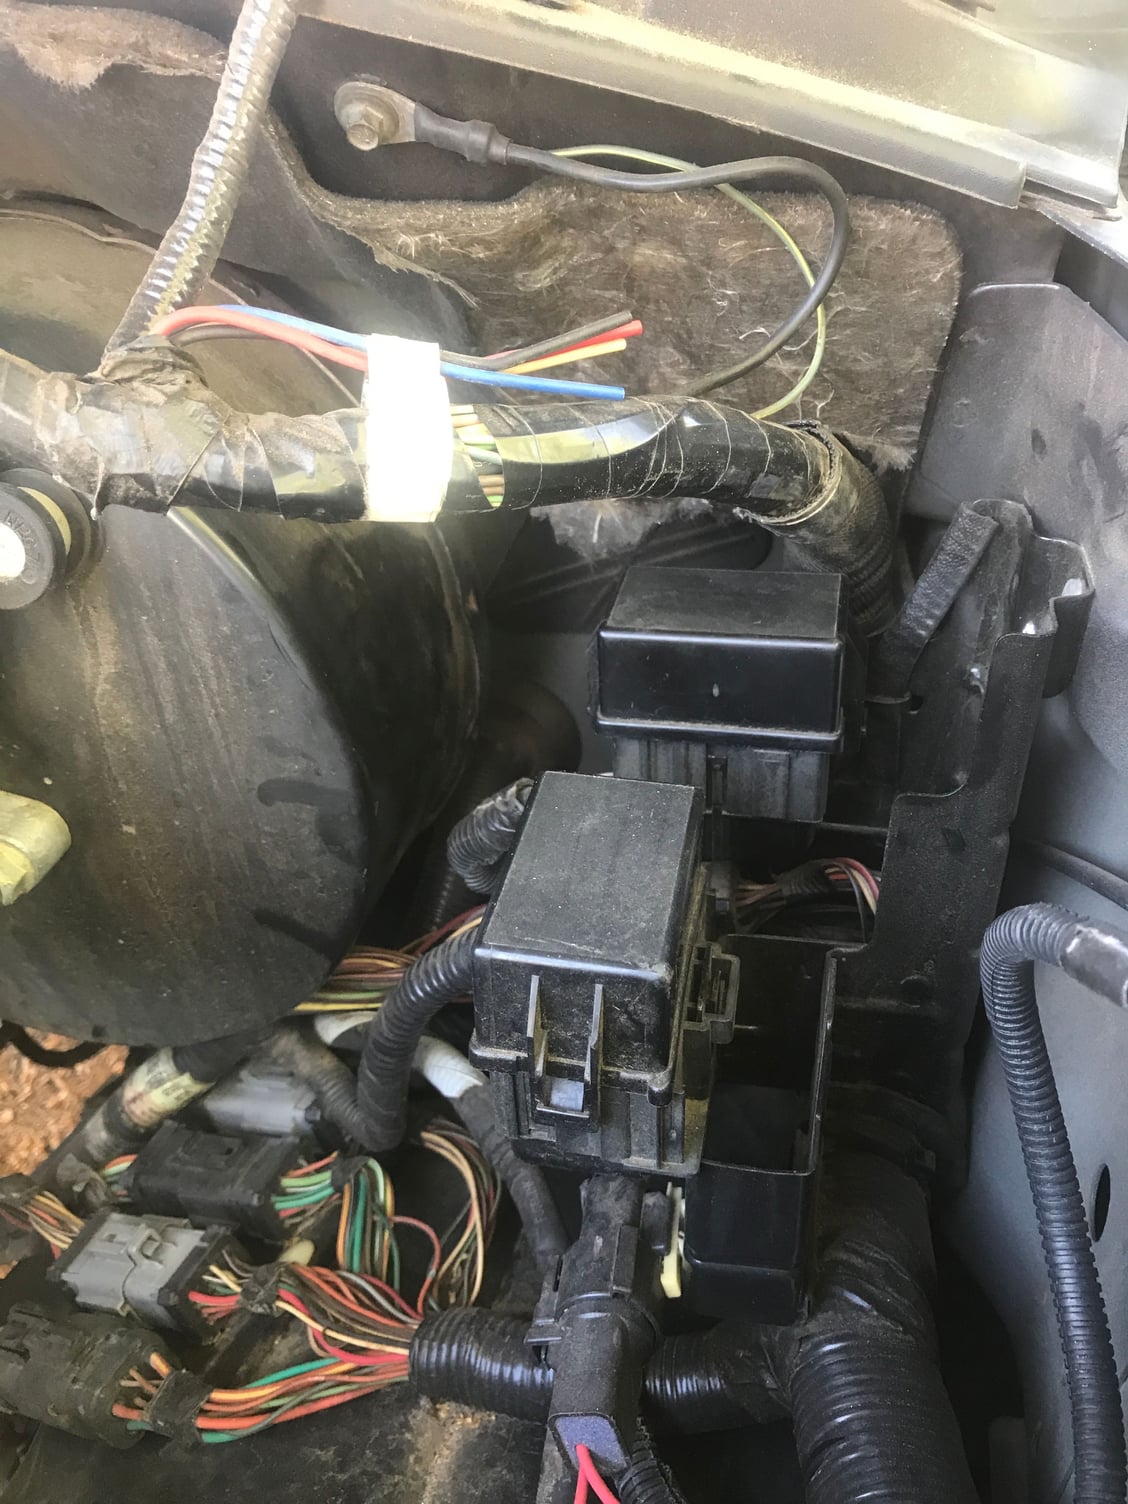 Left trailer running light stays on - Ford Truck Enthusiasts Forums 2014 Ford F150 Trailer Lights Not Working